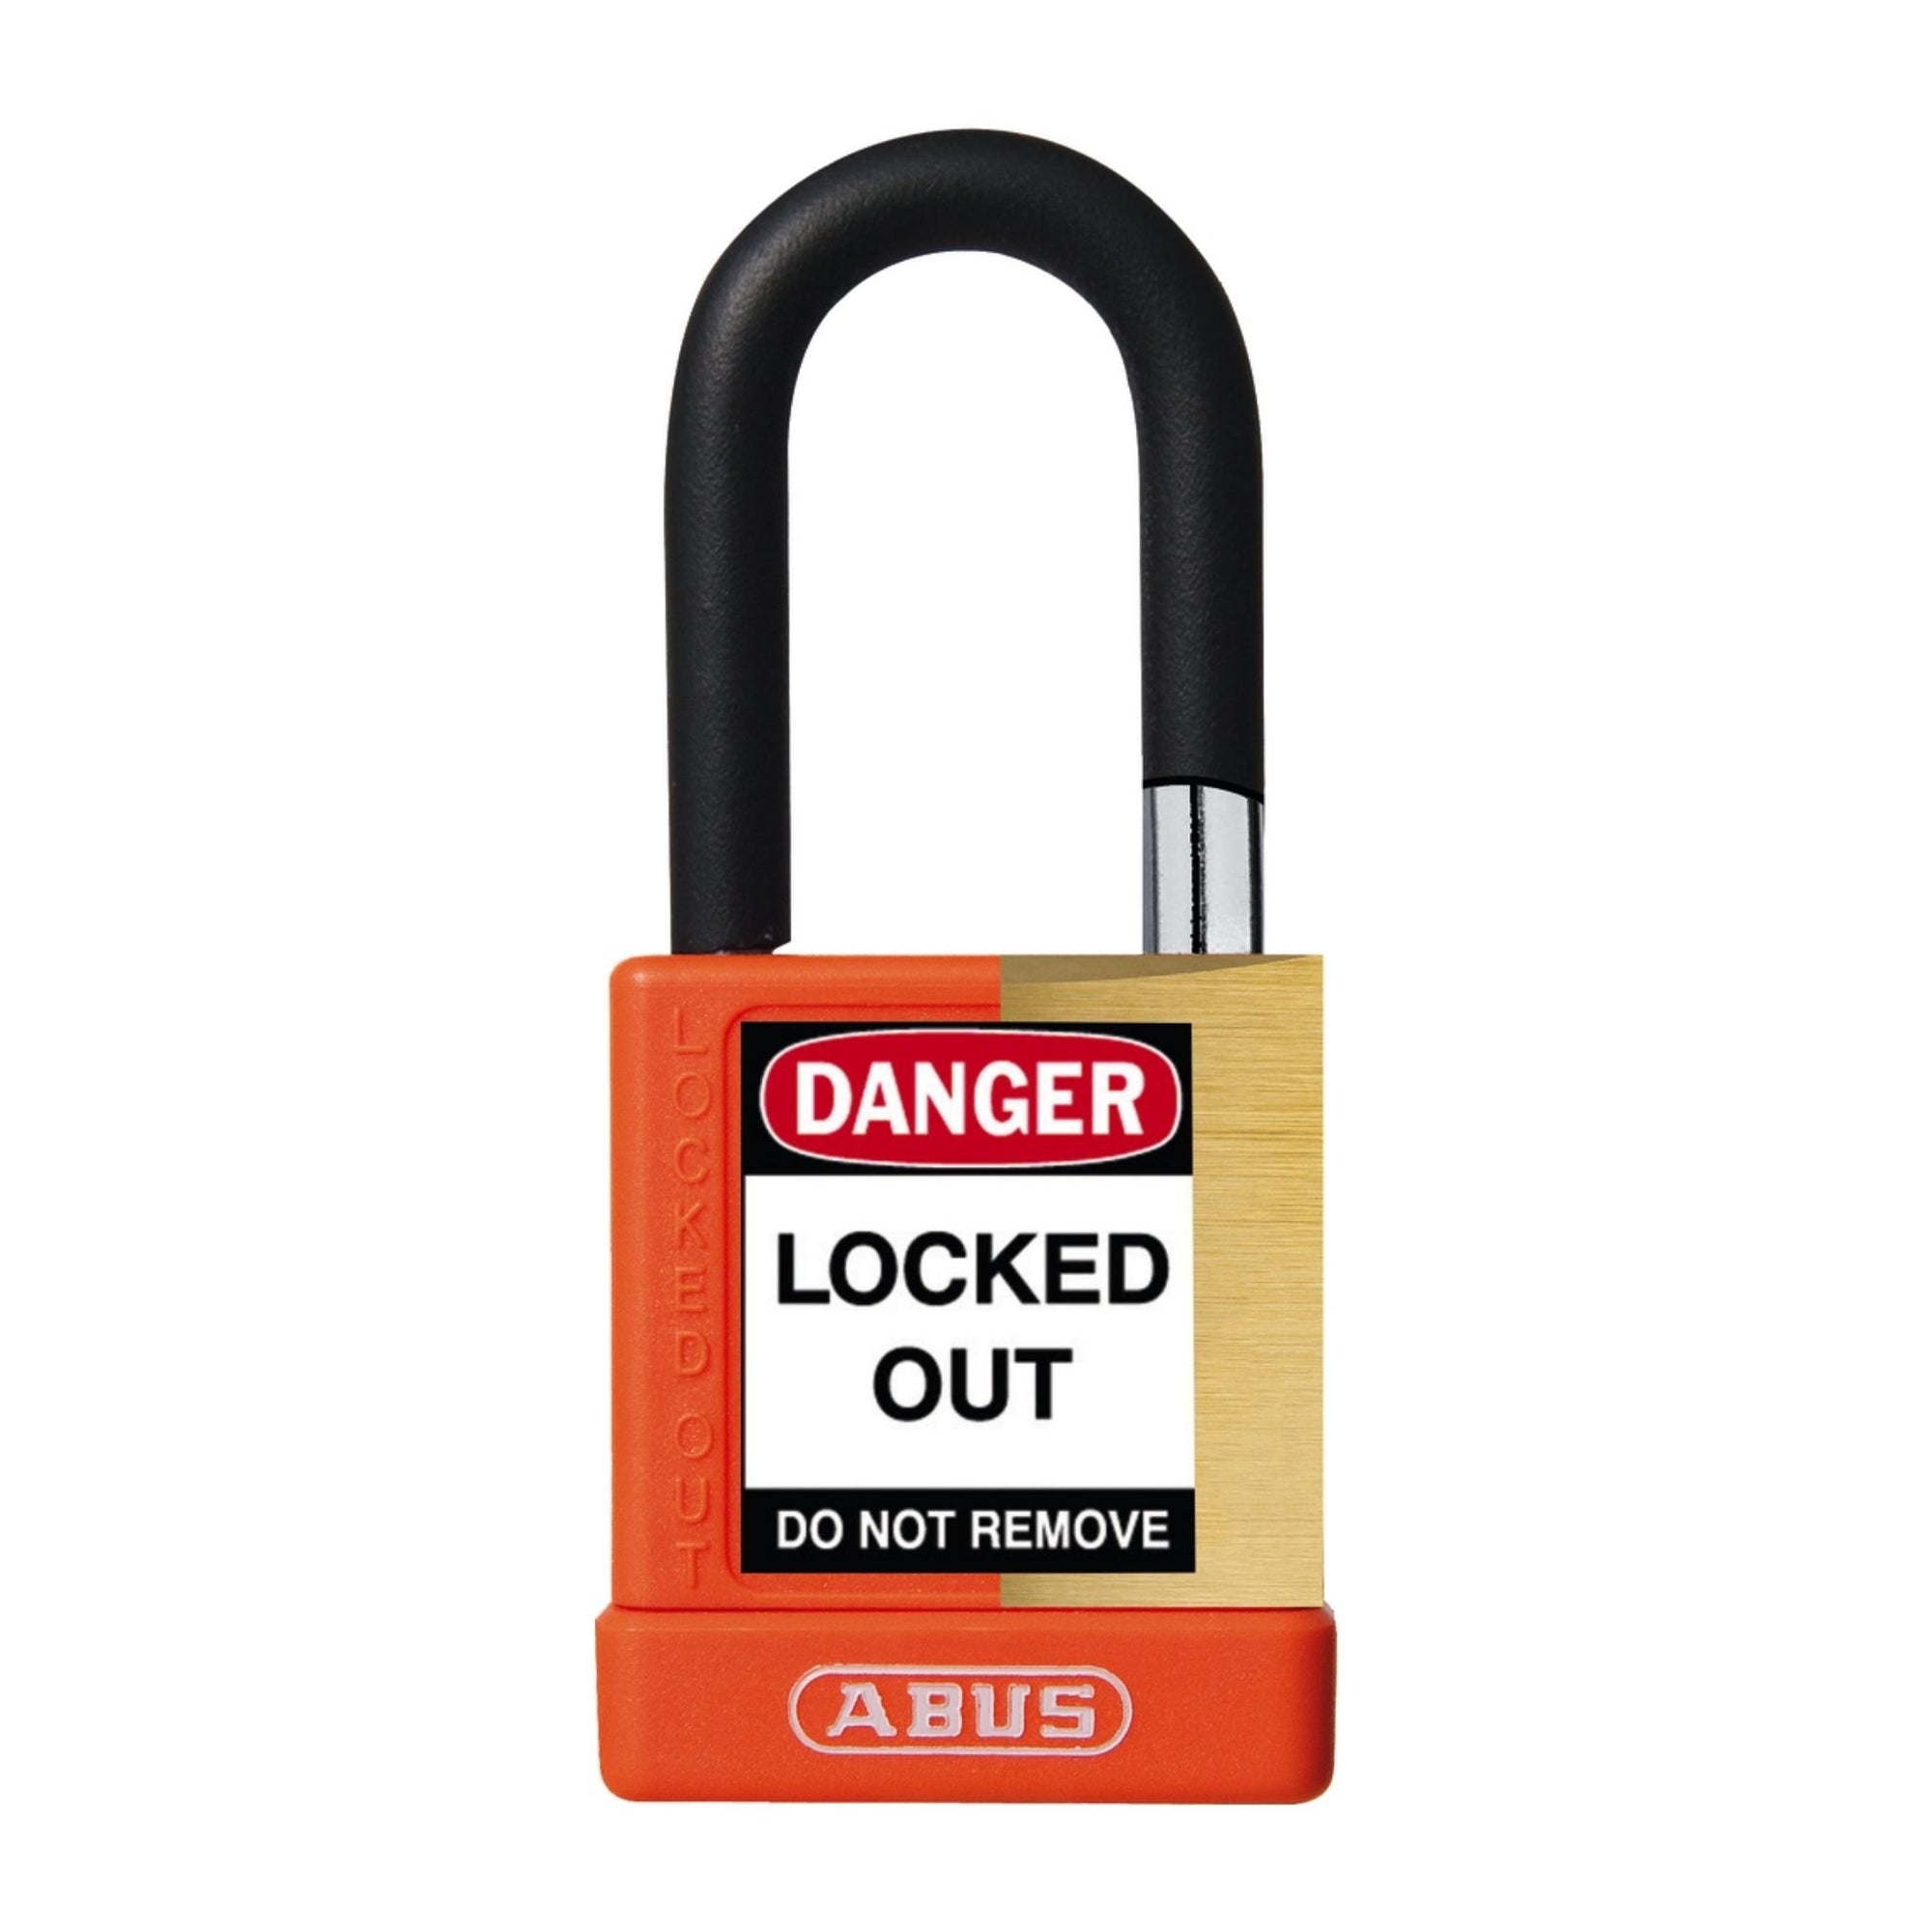 Abus 74M/40 KA Orange Insulated Brass Safety Padlock with 1-1/2" Shackle - The Lock Source